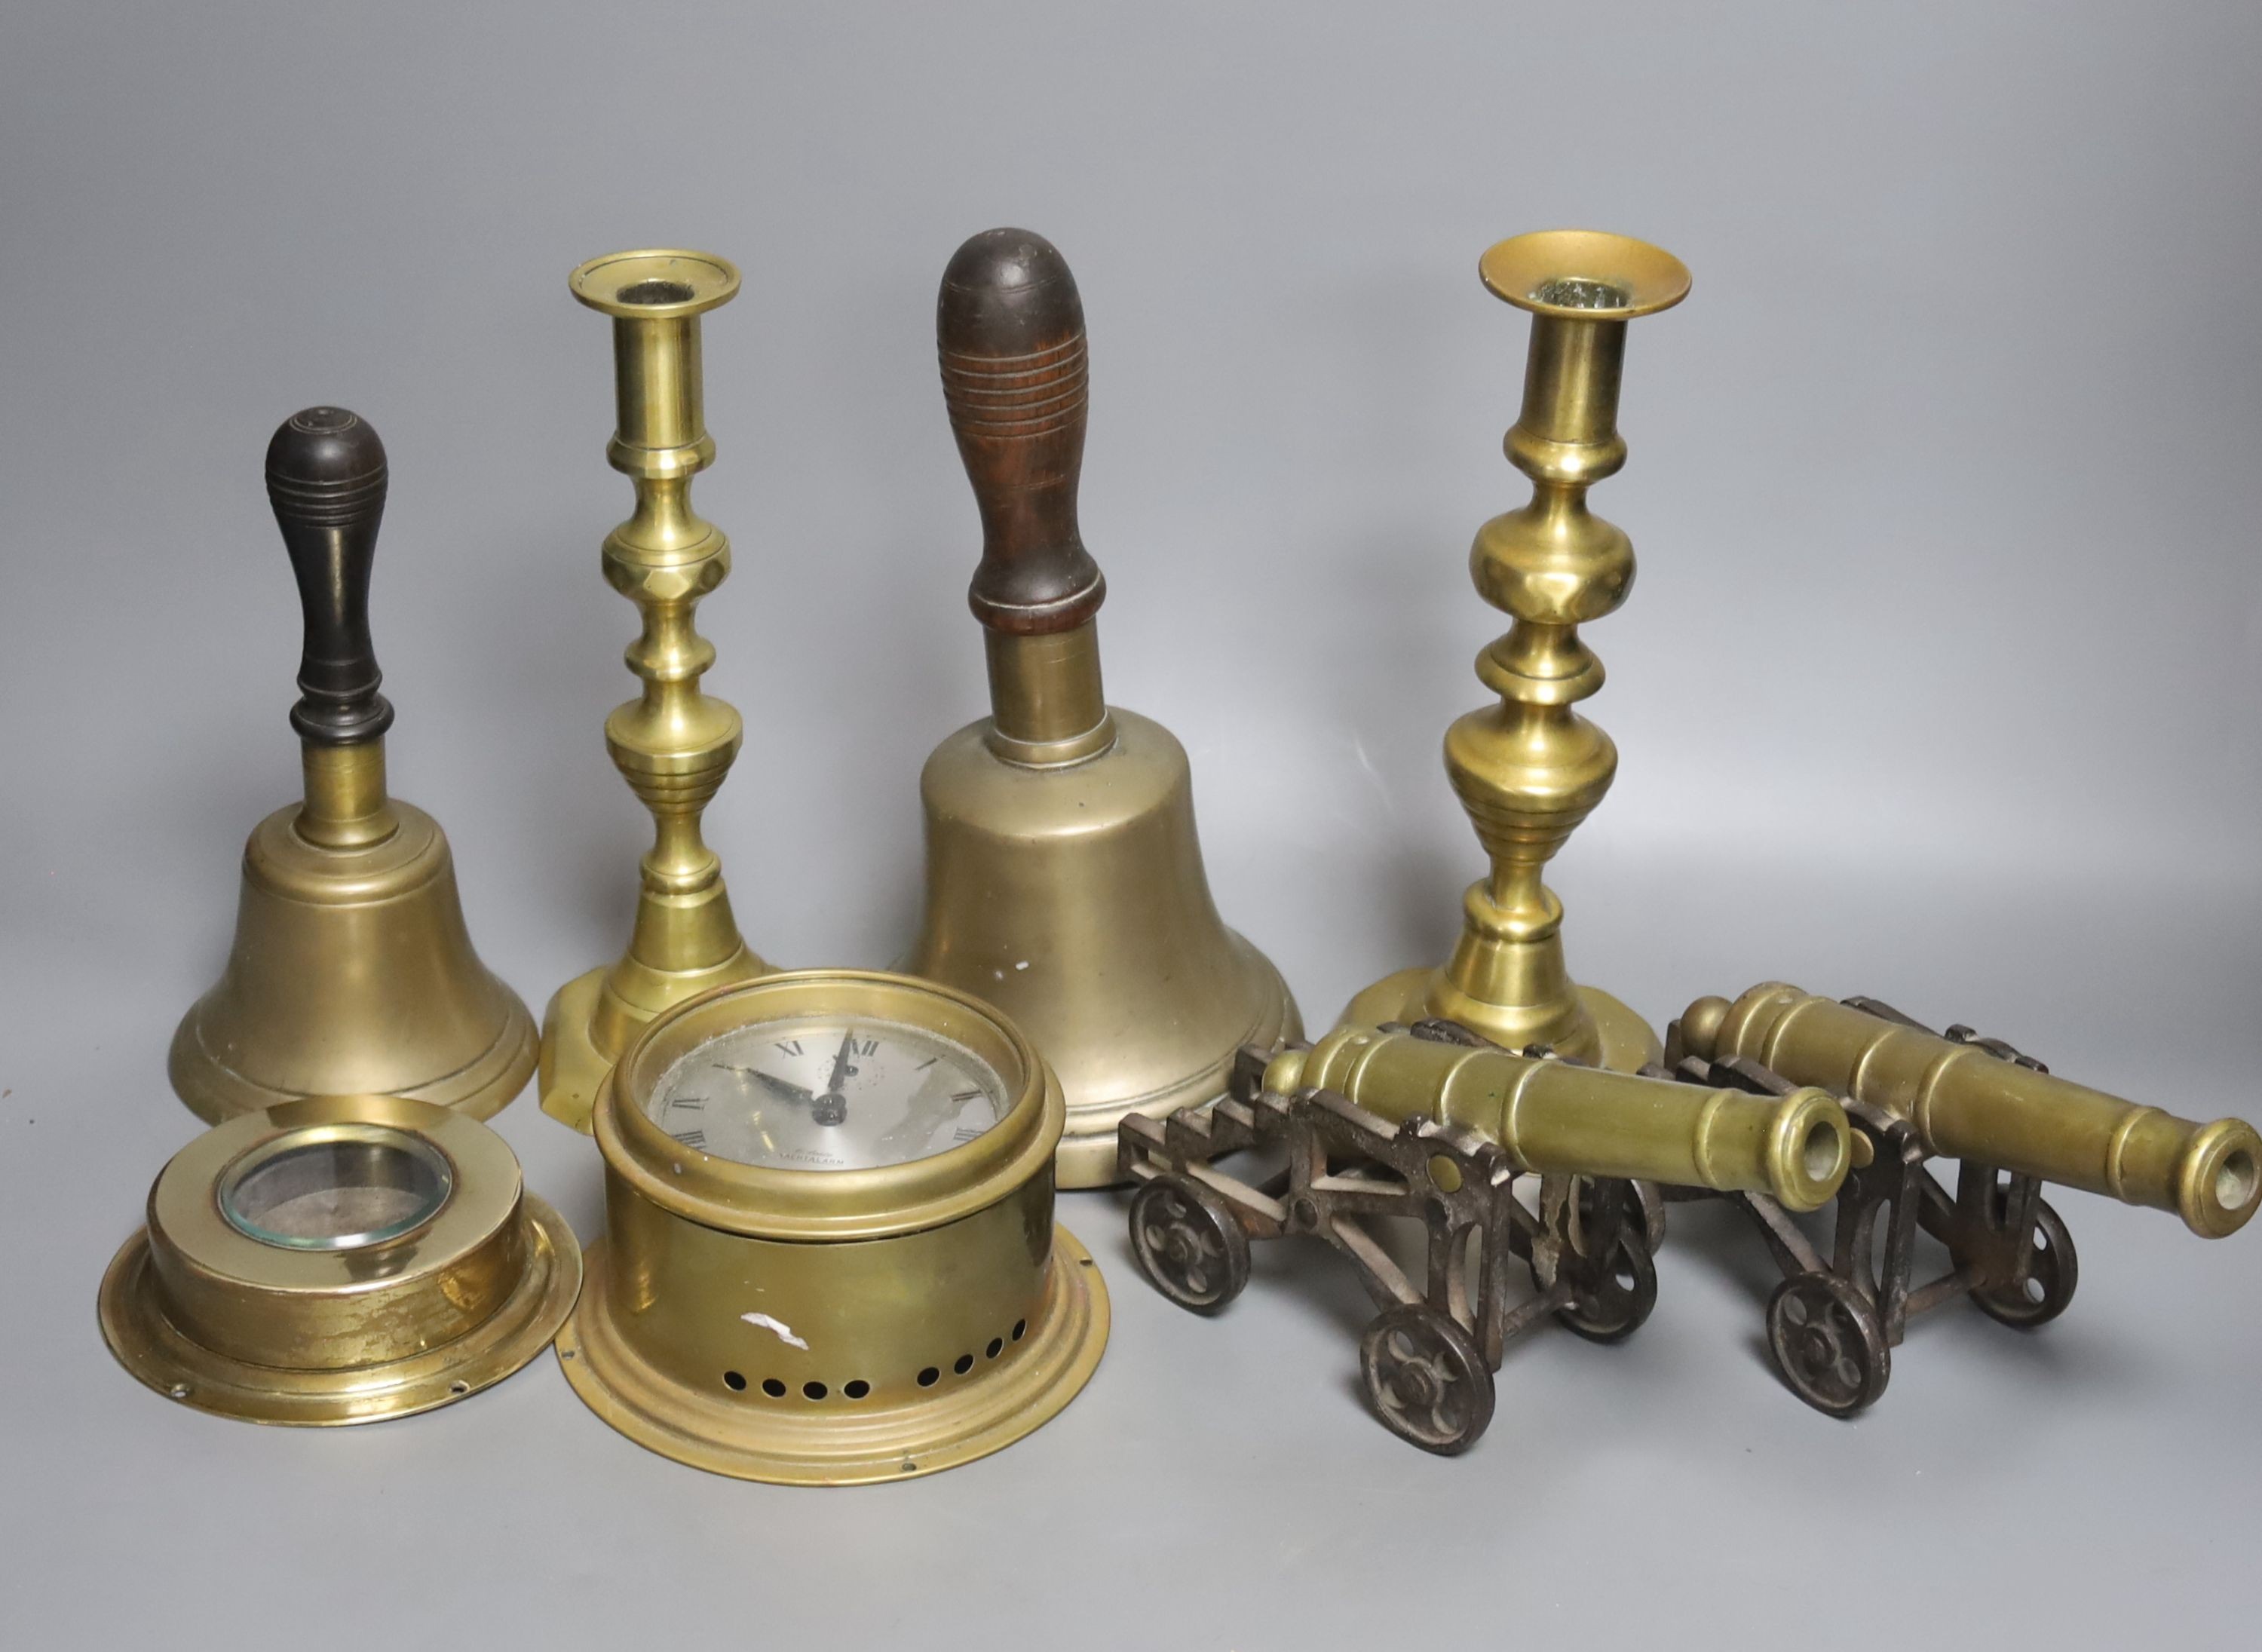 A quantity of brassware including bells, model cannons, candlesticks etc.